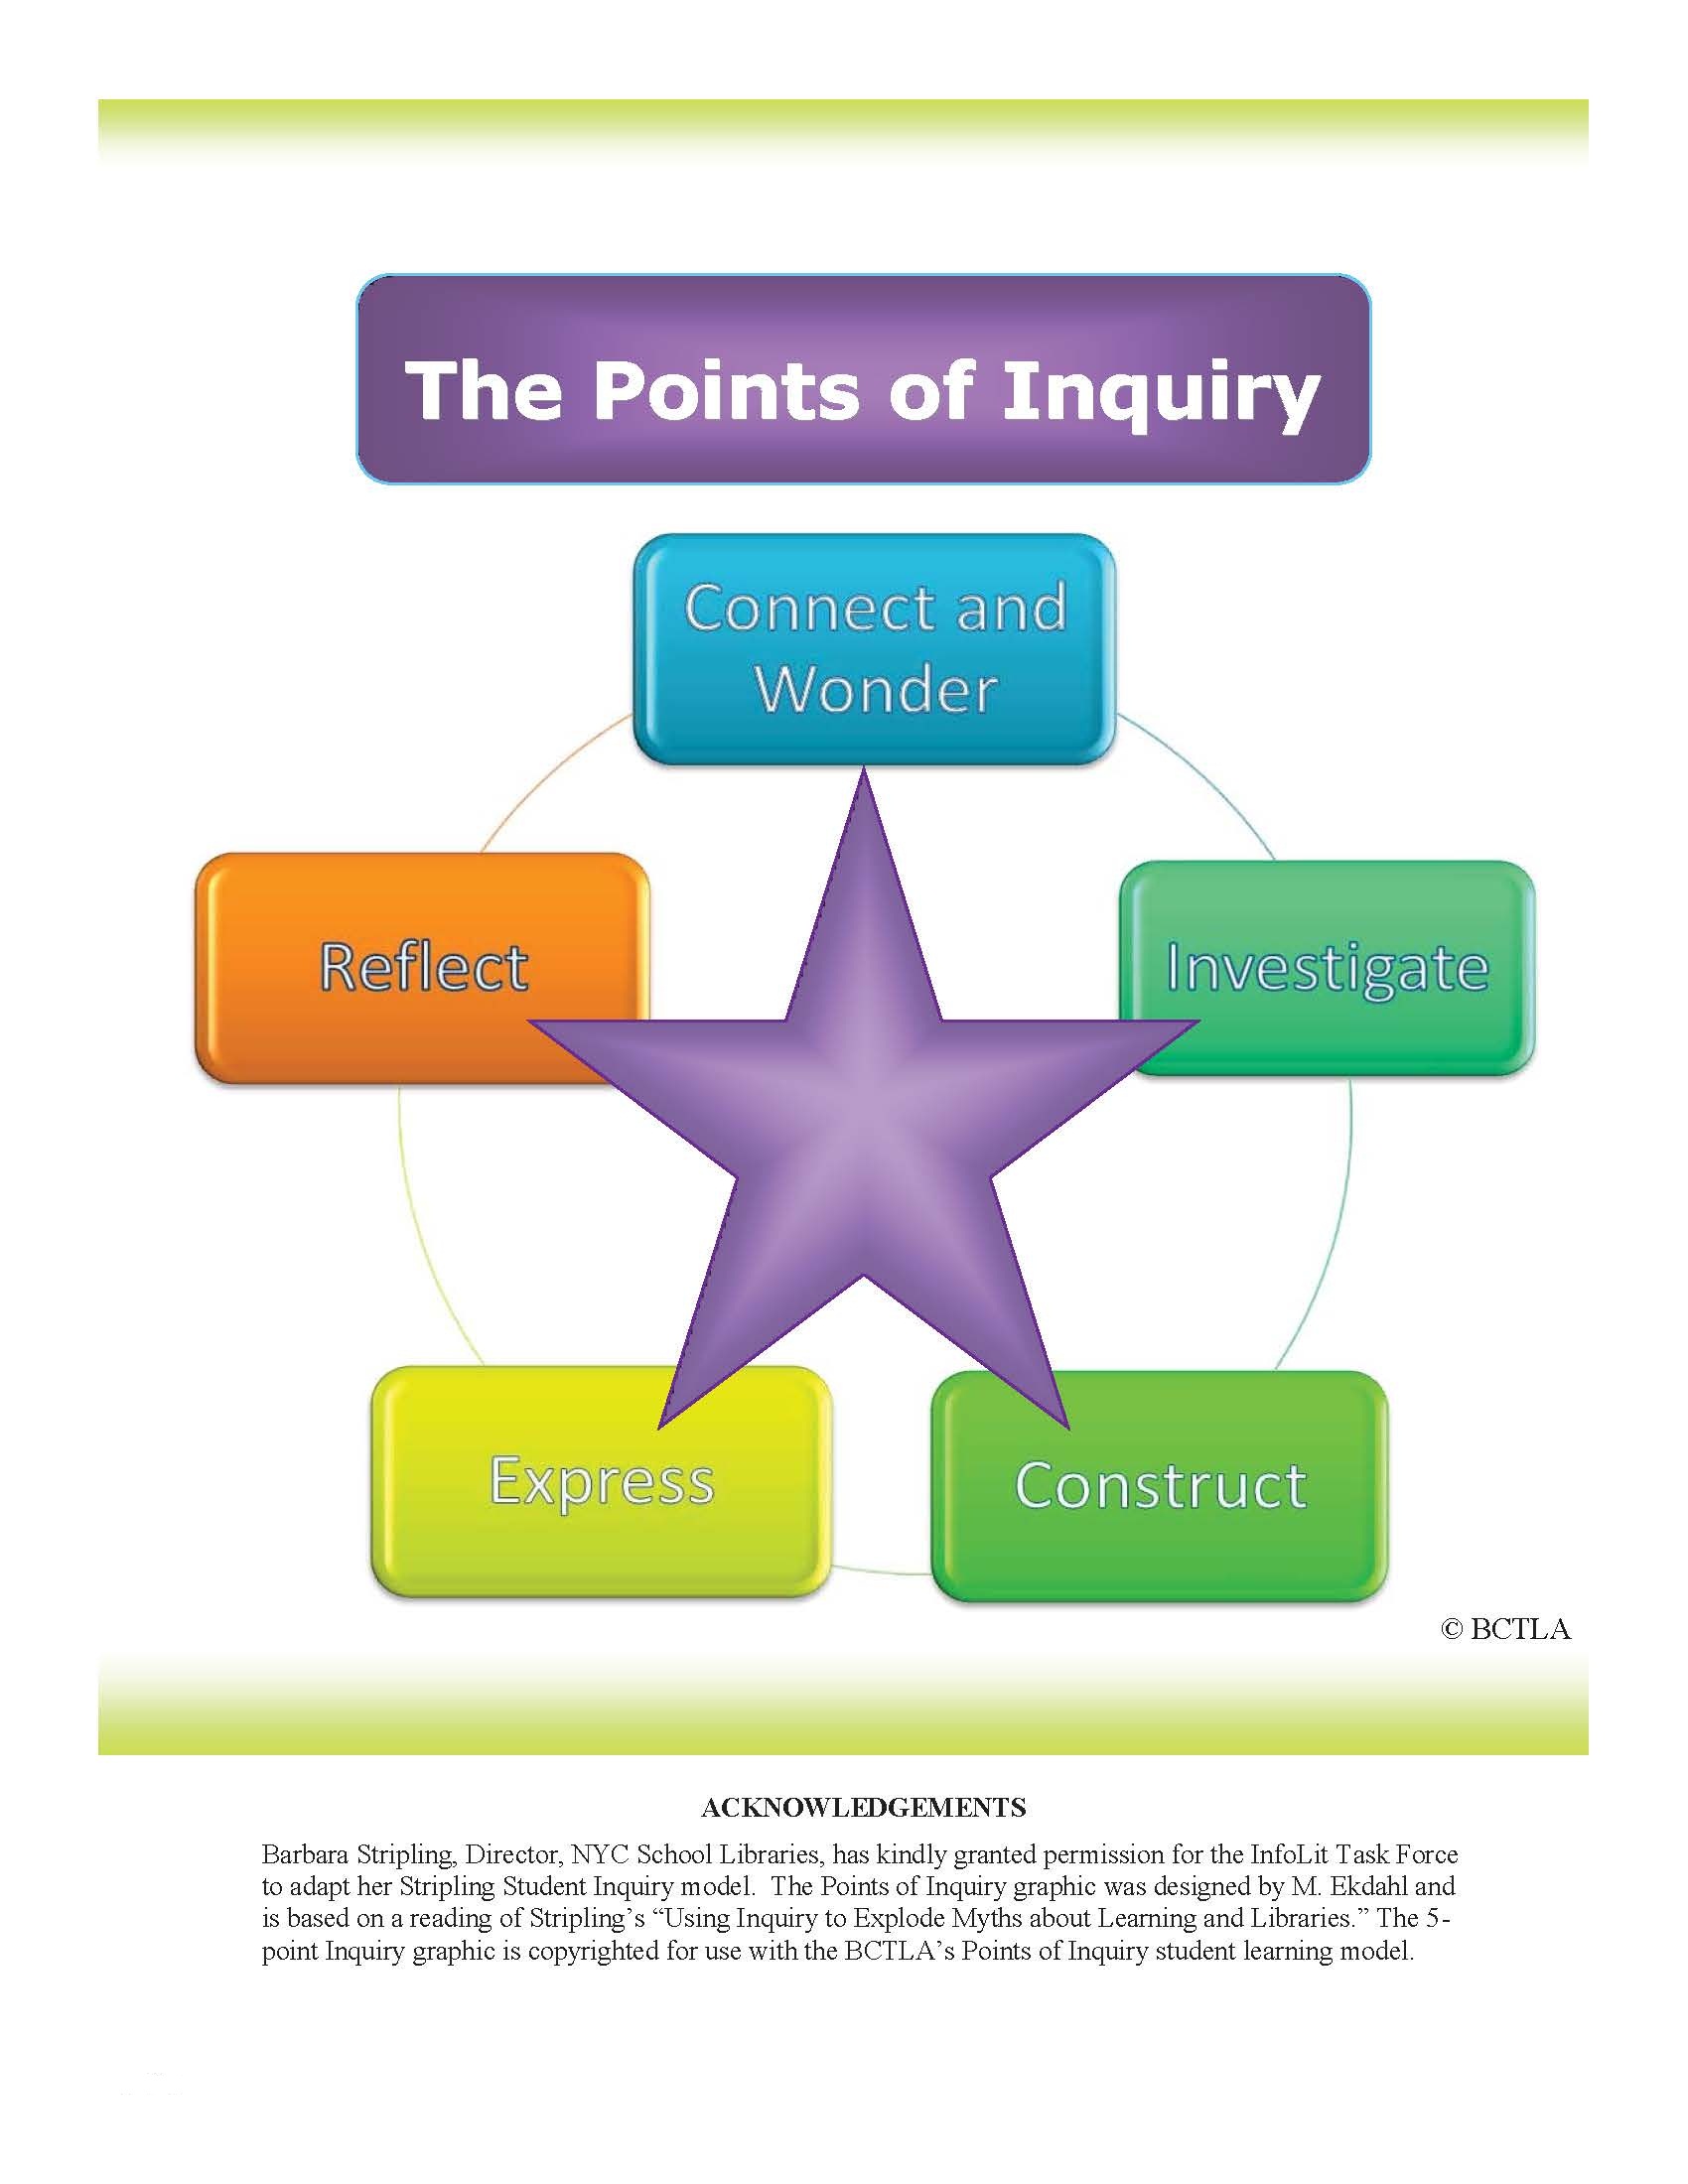 The Points of Inquiry_ A Framework for Information Literacy and the 21st-Century Learner - Barbara Stripling - BCTLA